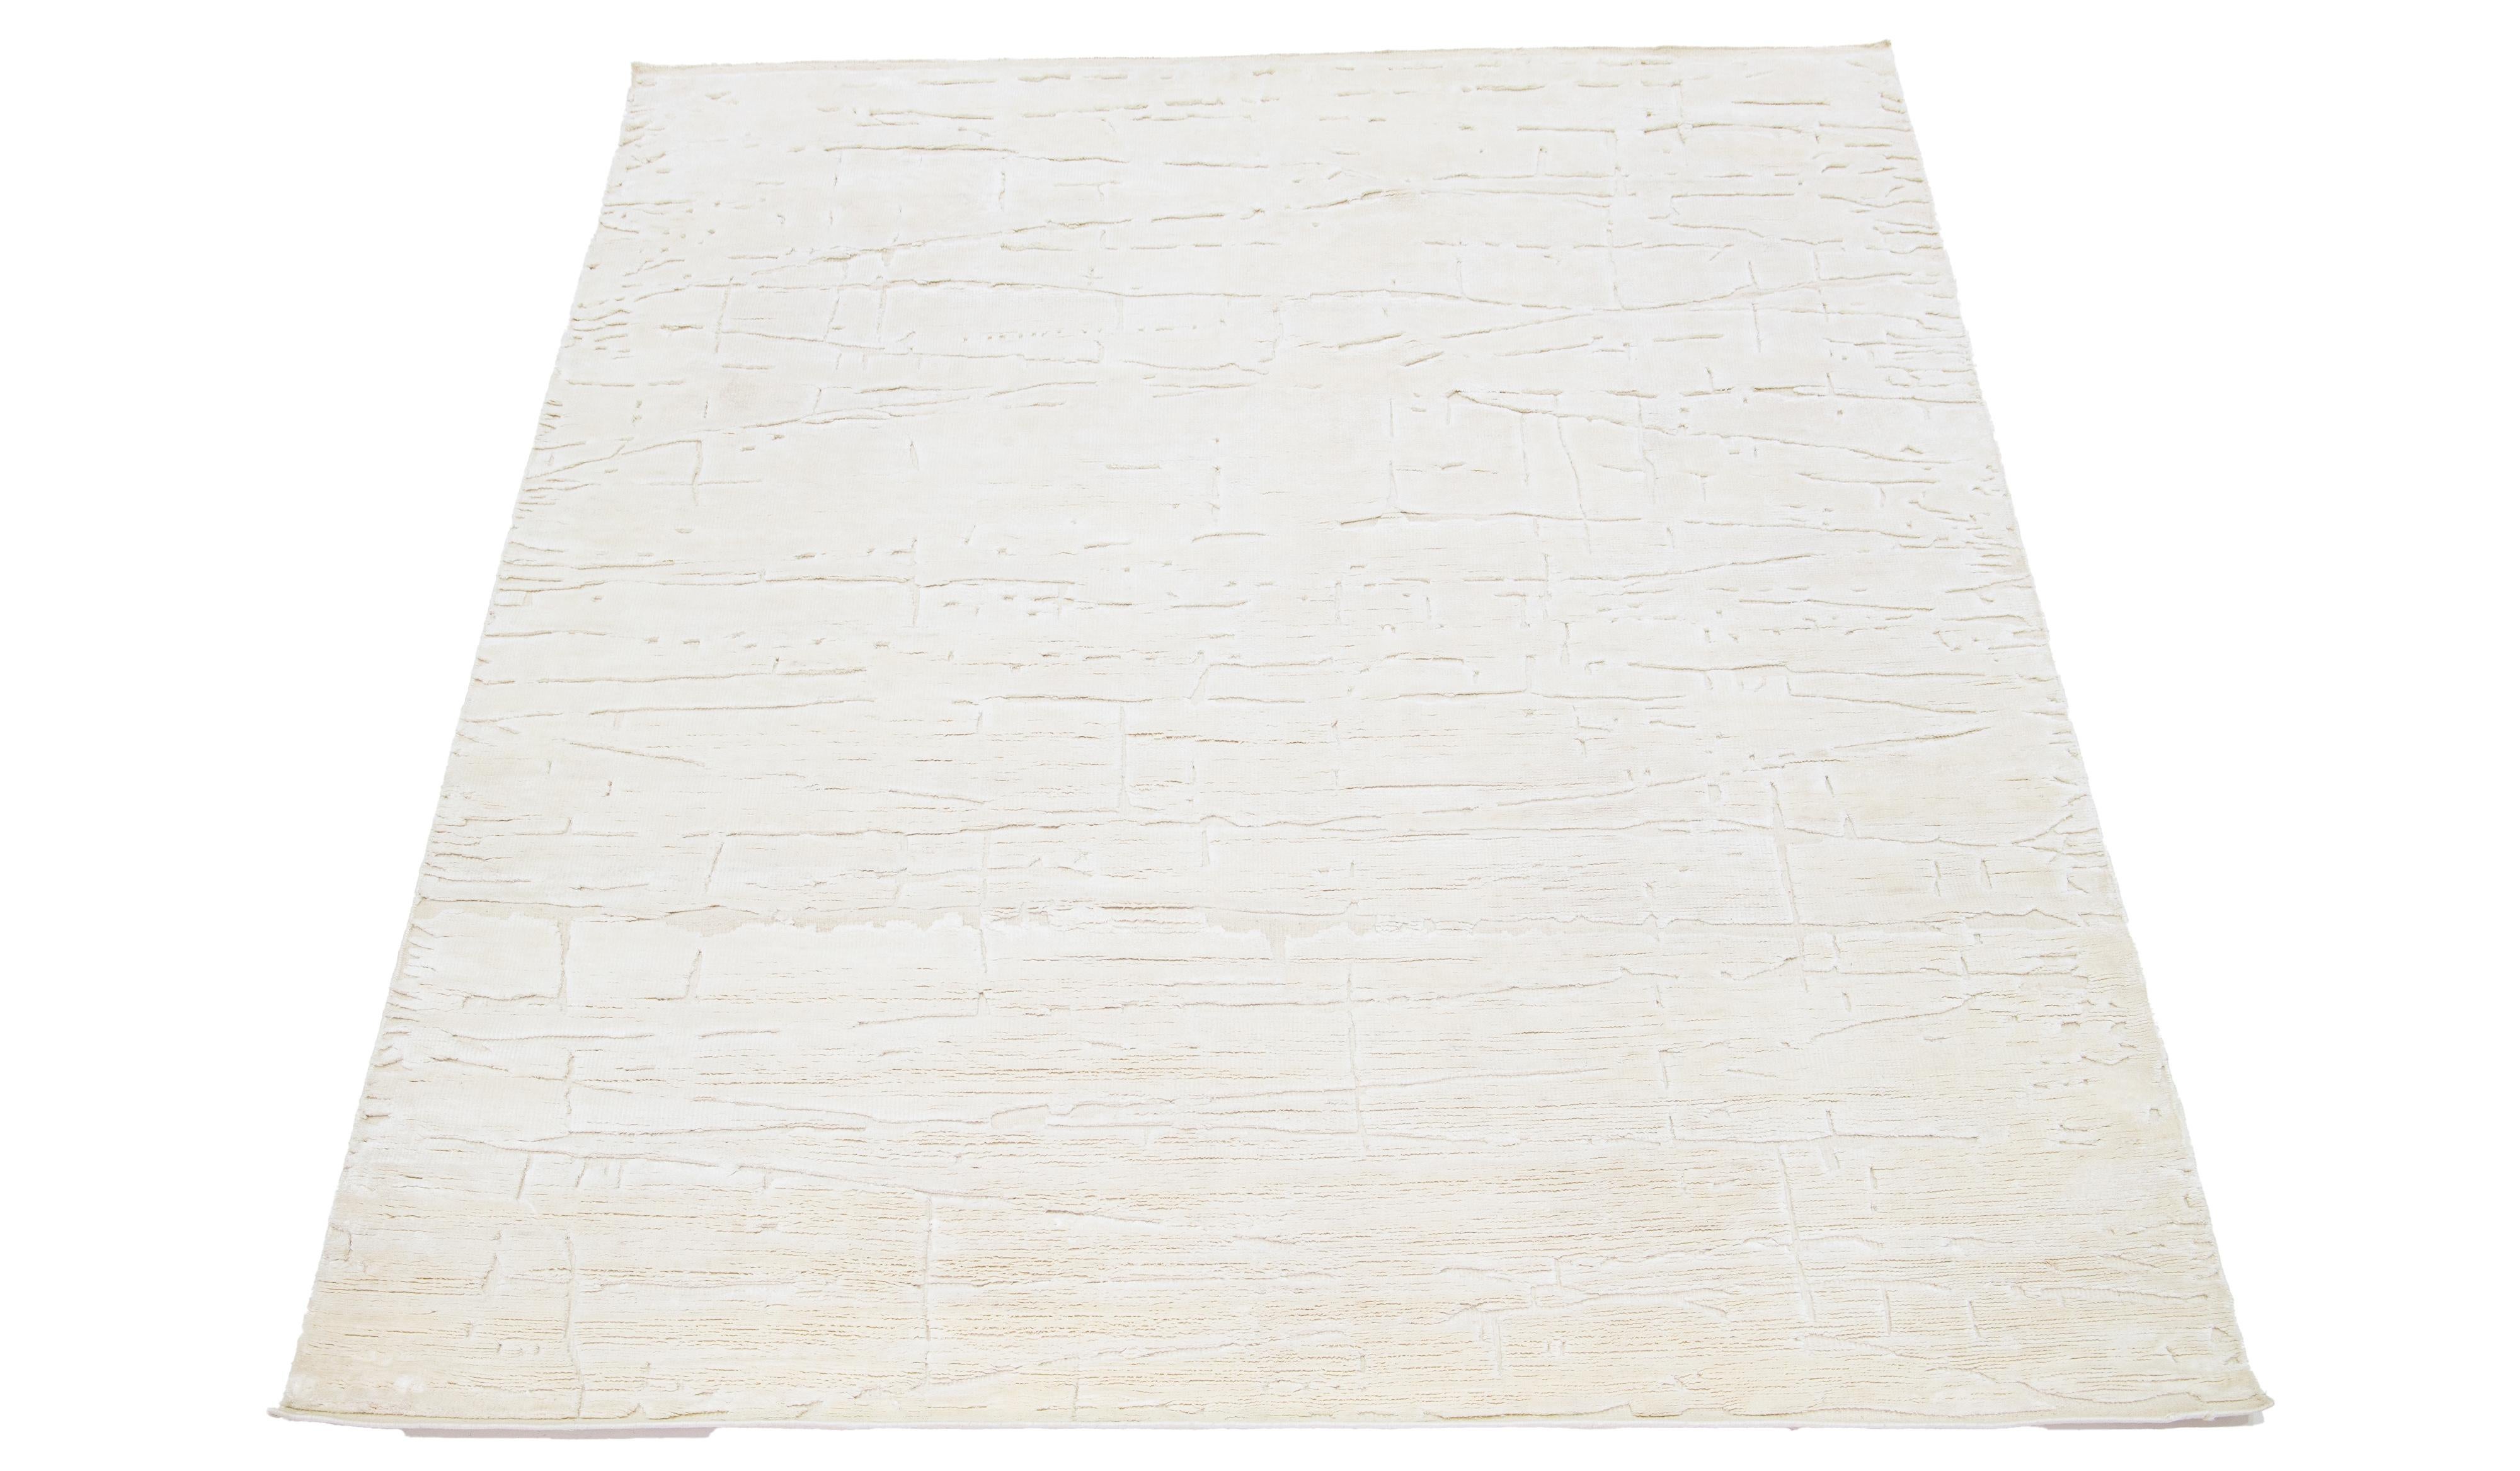 This wool rug, expertly hand-knotted, features a contemporary Moroccan design in subdued beige tones contrasted against a striking ivory backdrop, resulting in a strikingly minimalist presentation.

This rug measures 8' x 10'2